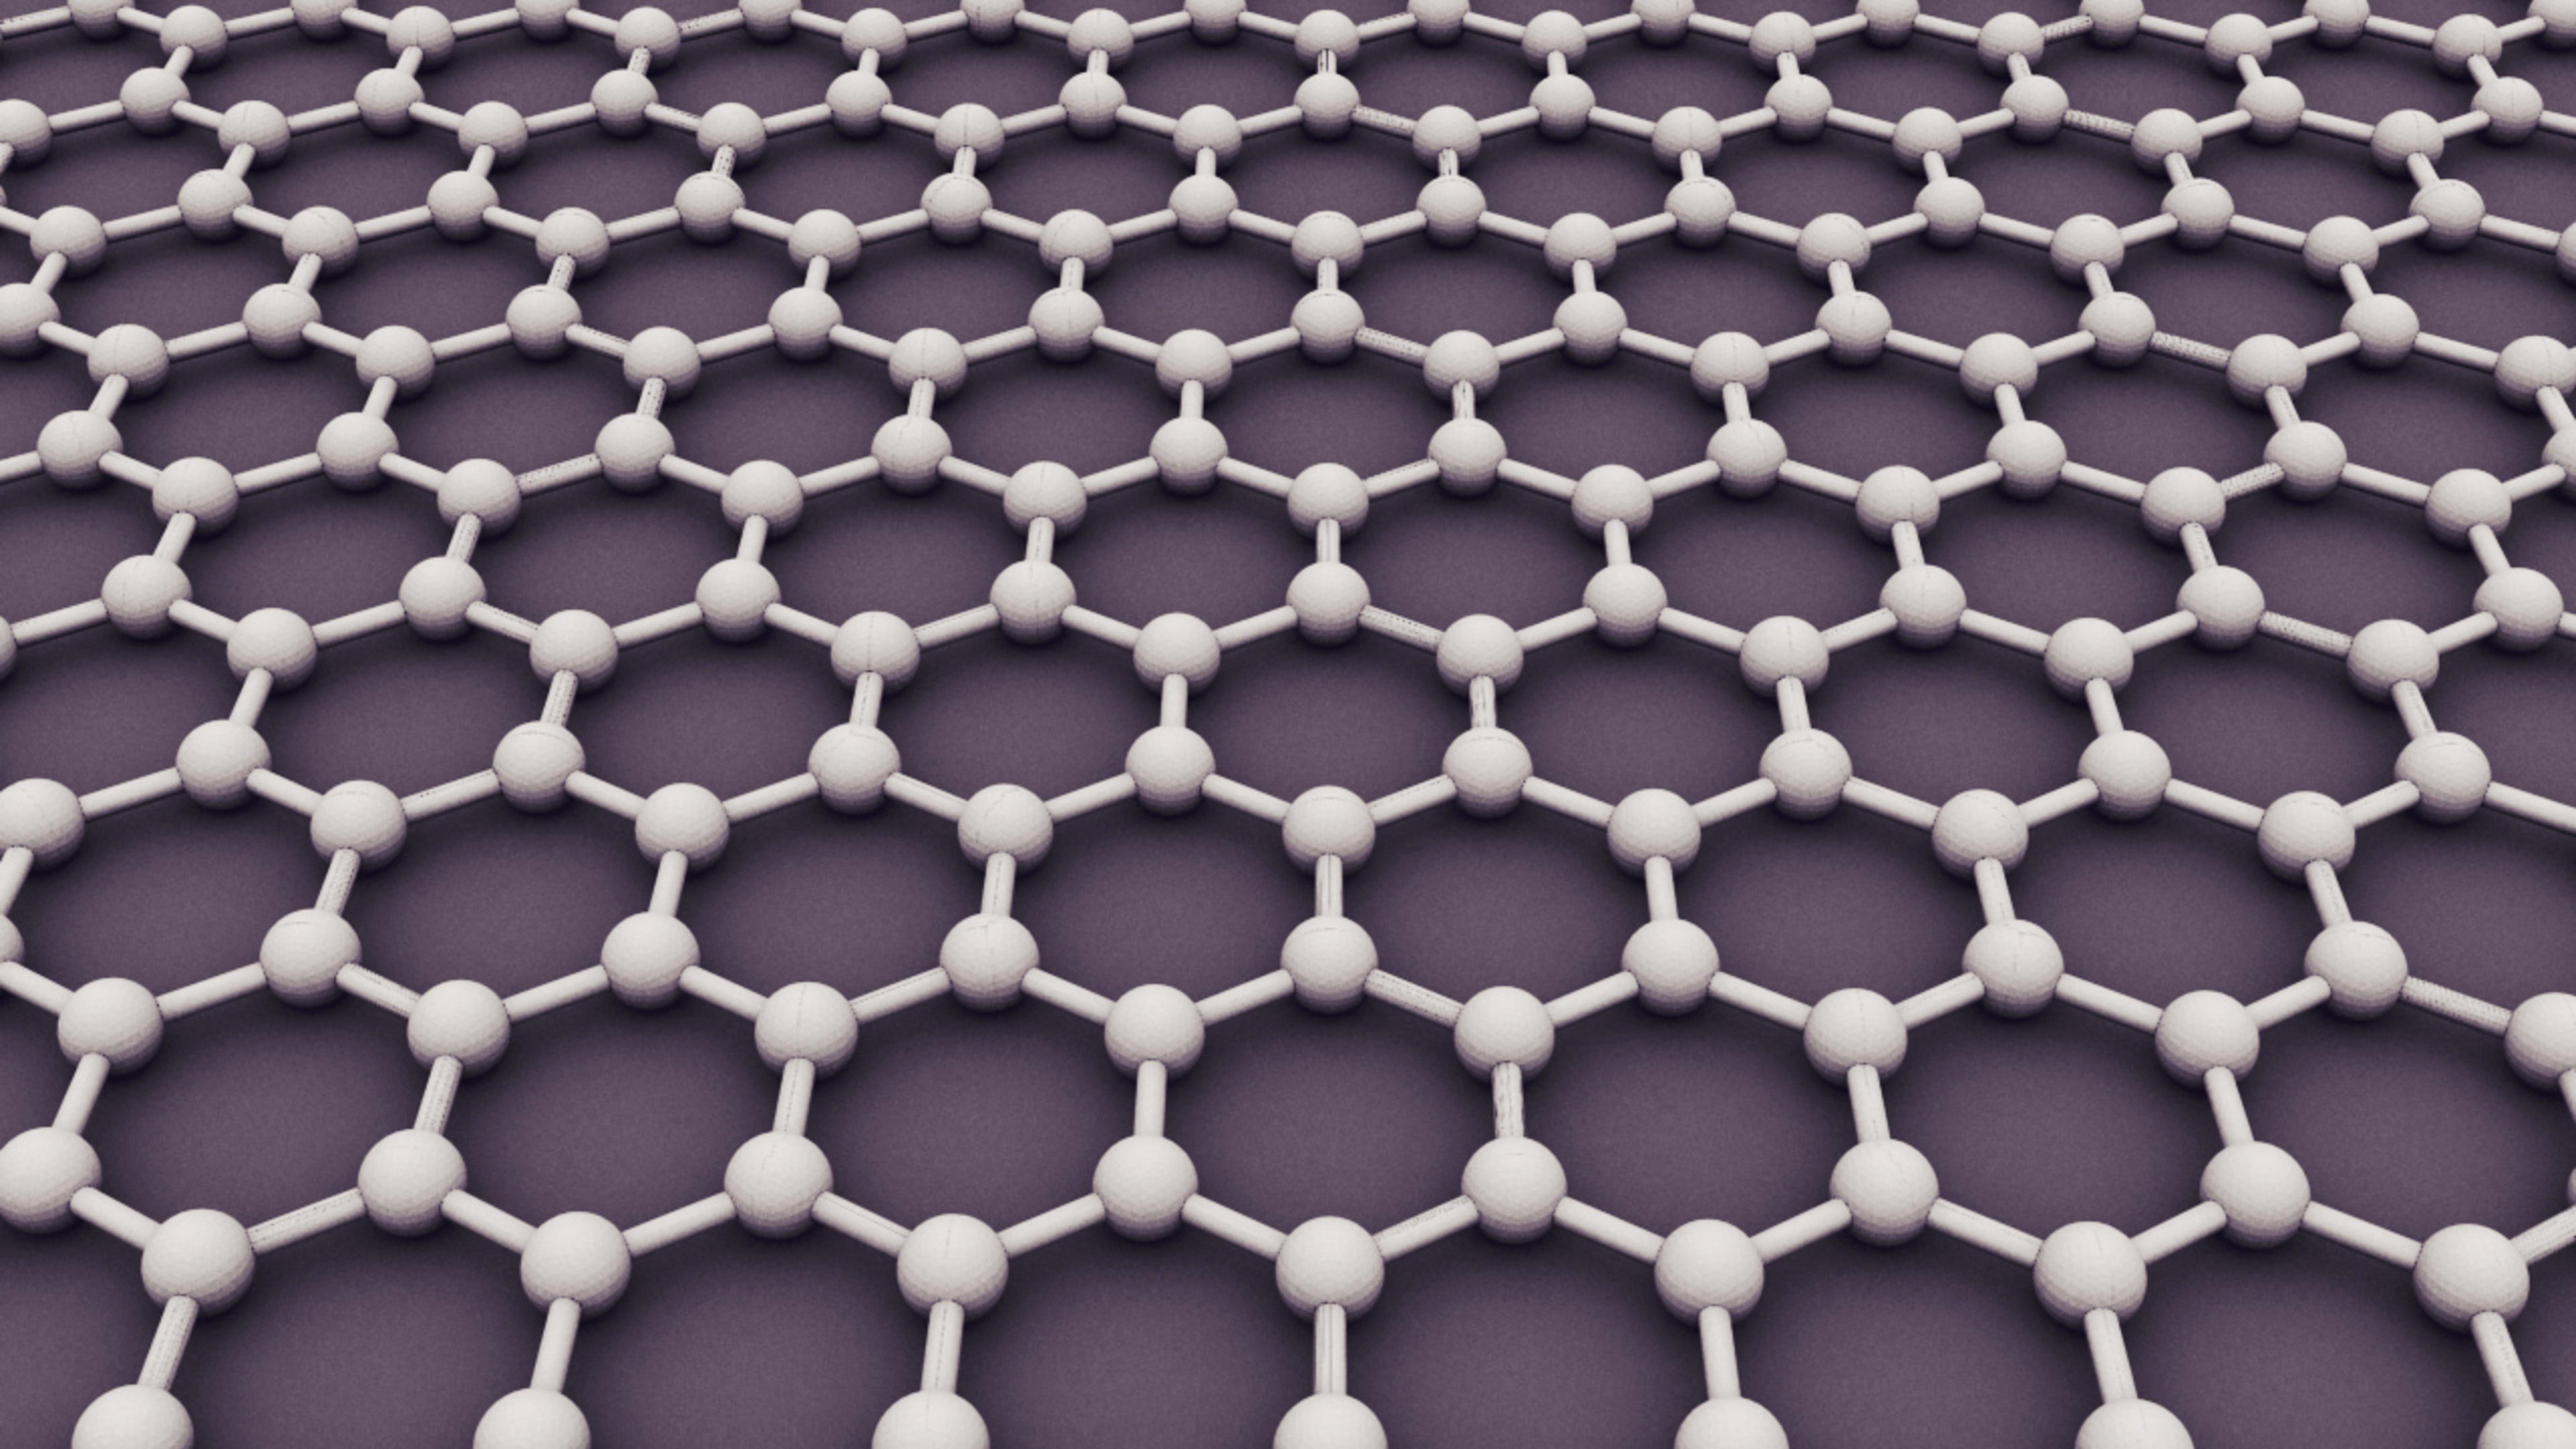 Why Graphene Sheets Make Sexier Chips Than Silicon